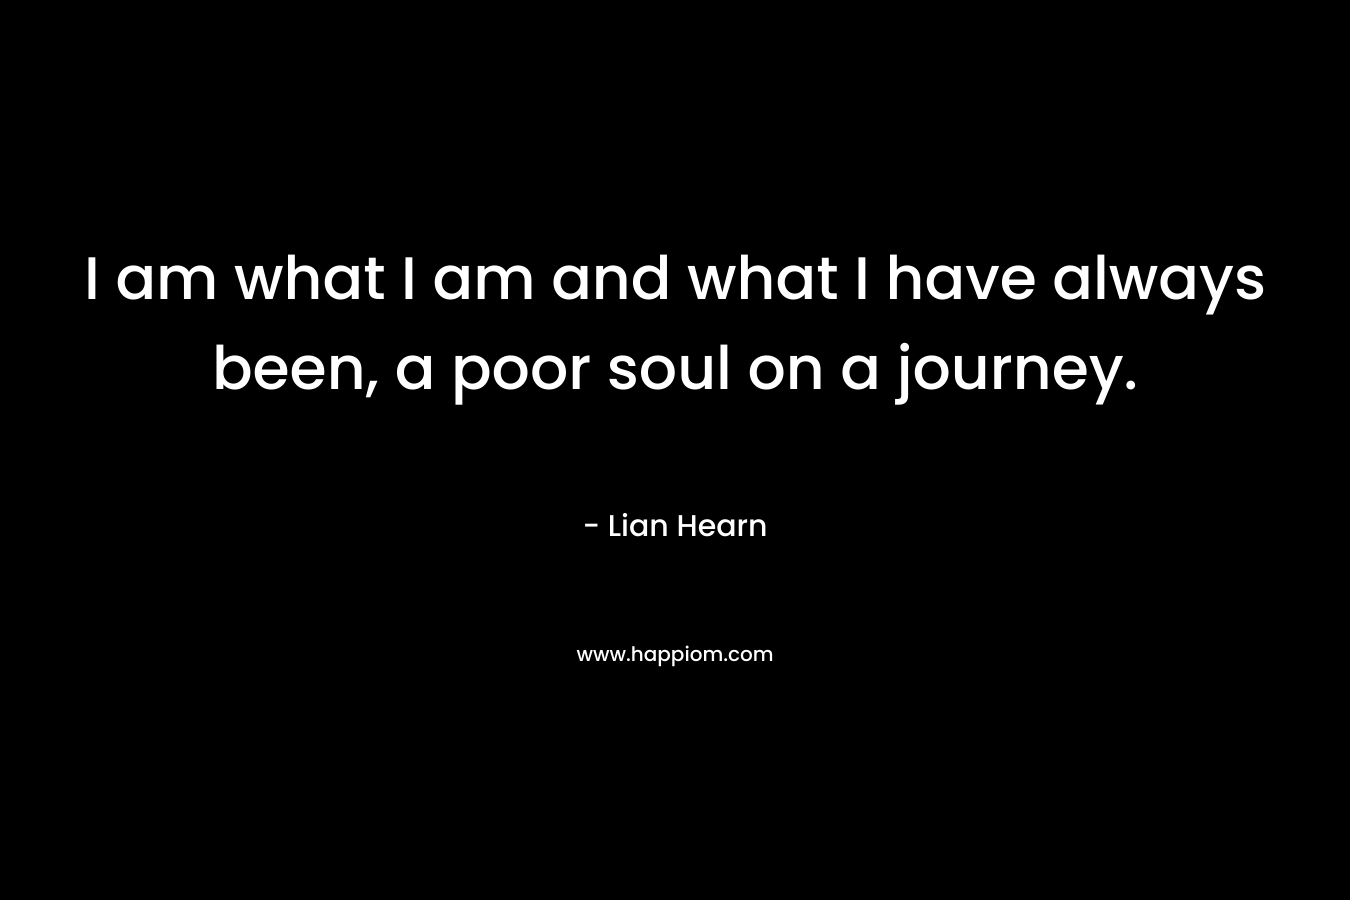 I am what I am and what I have always been, a poor soul on a journey.